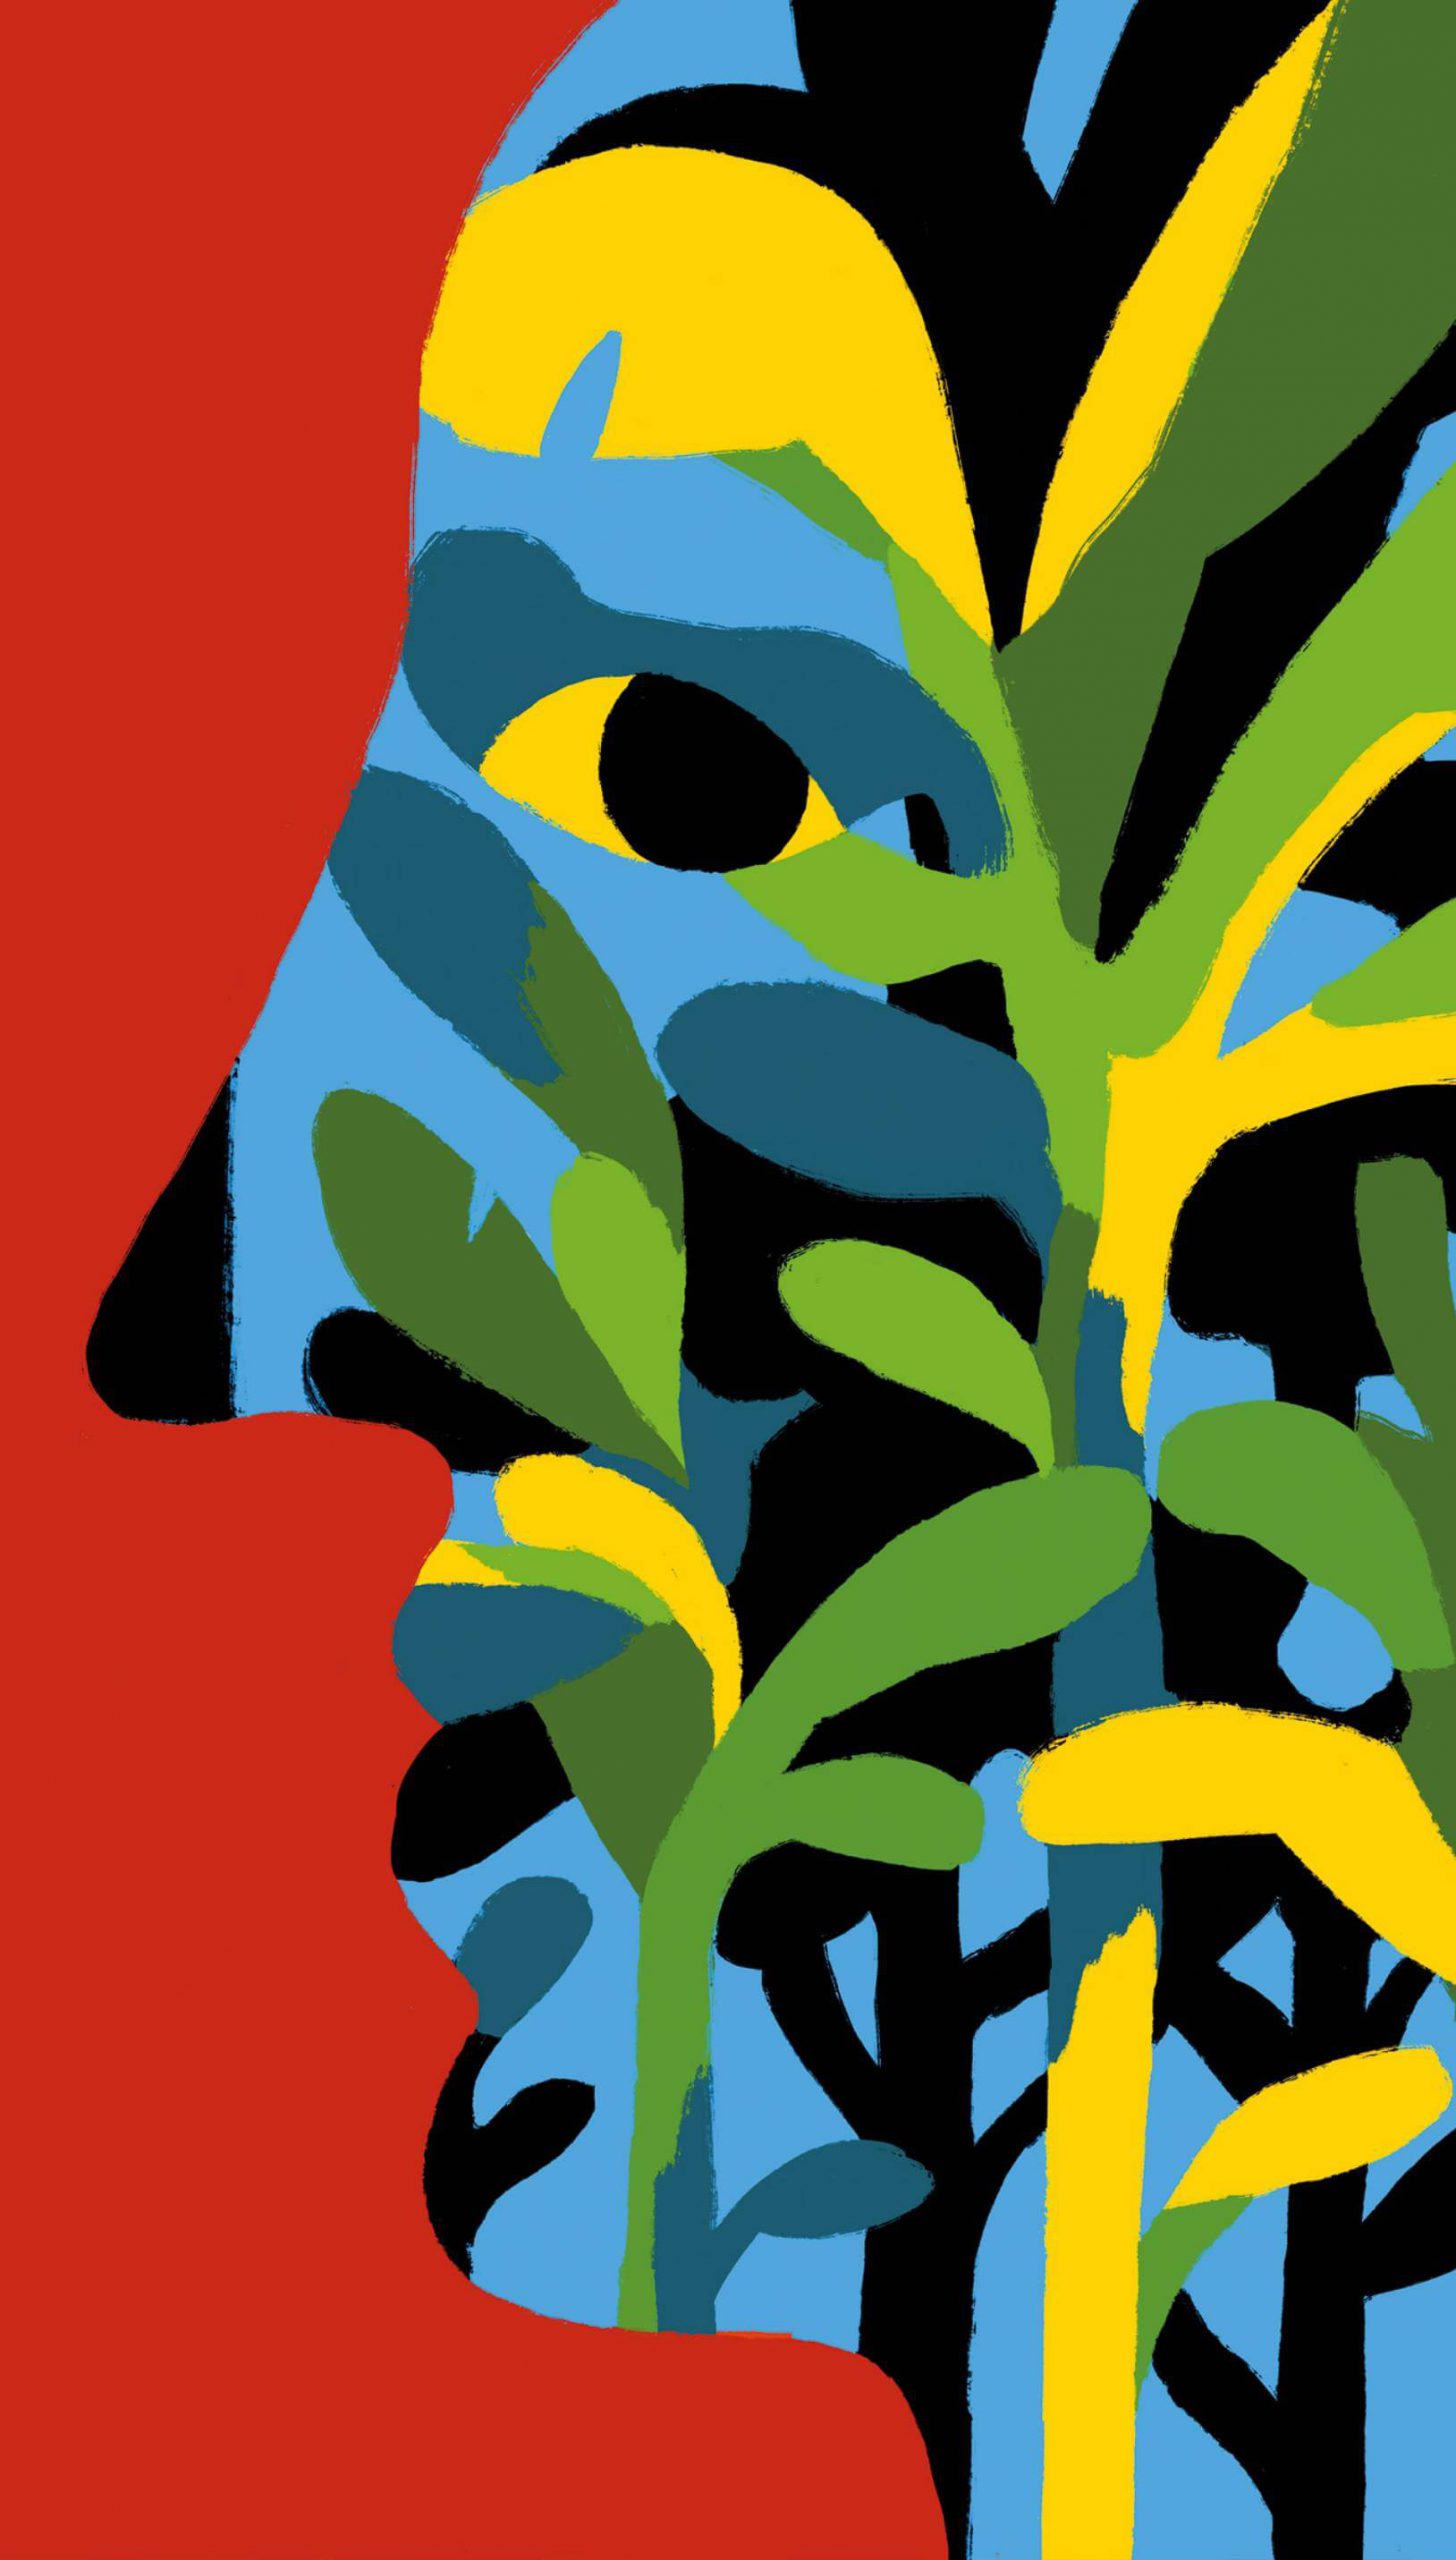 Profile painting of plants growing on a blue face on a red background.